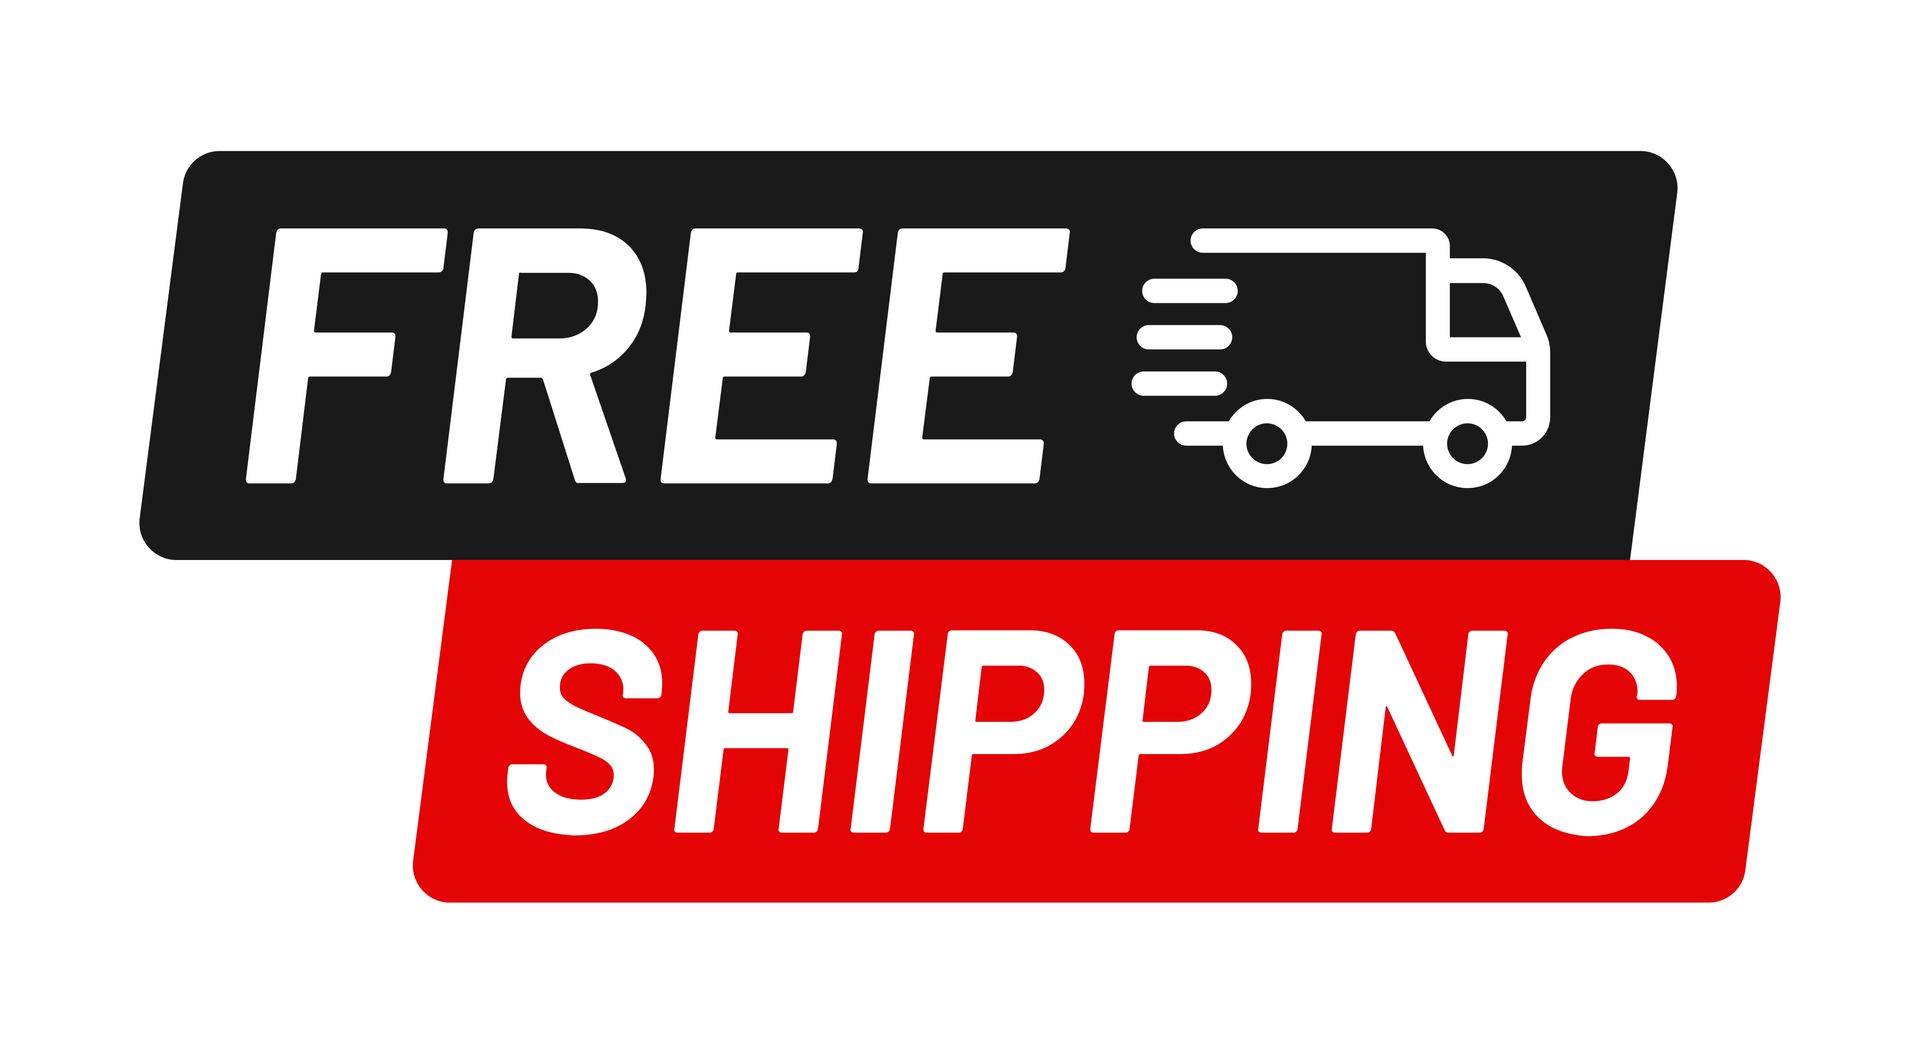 A free shipping logo with a truck on it.